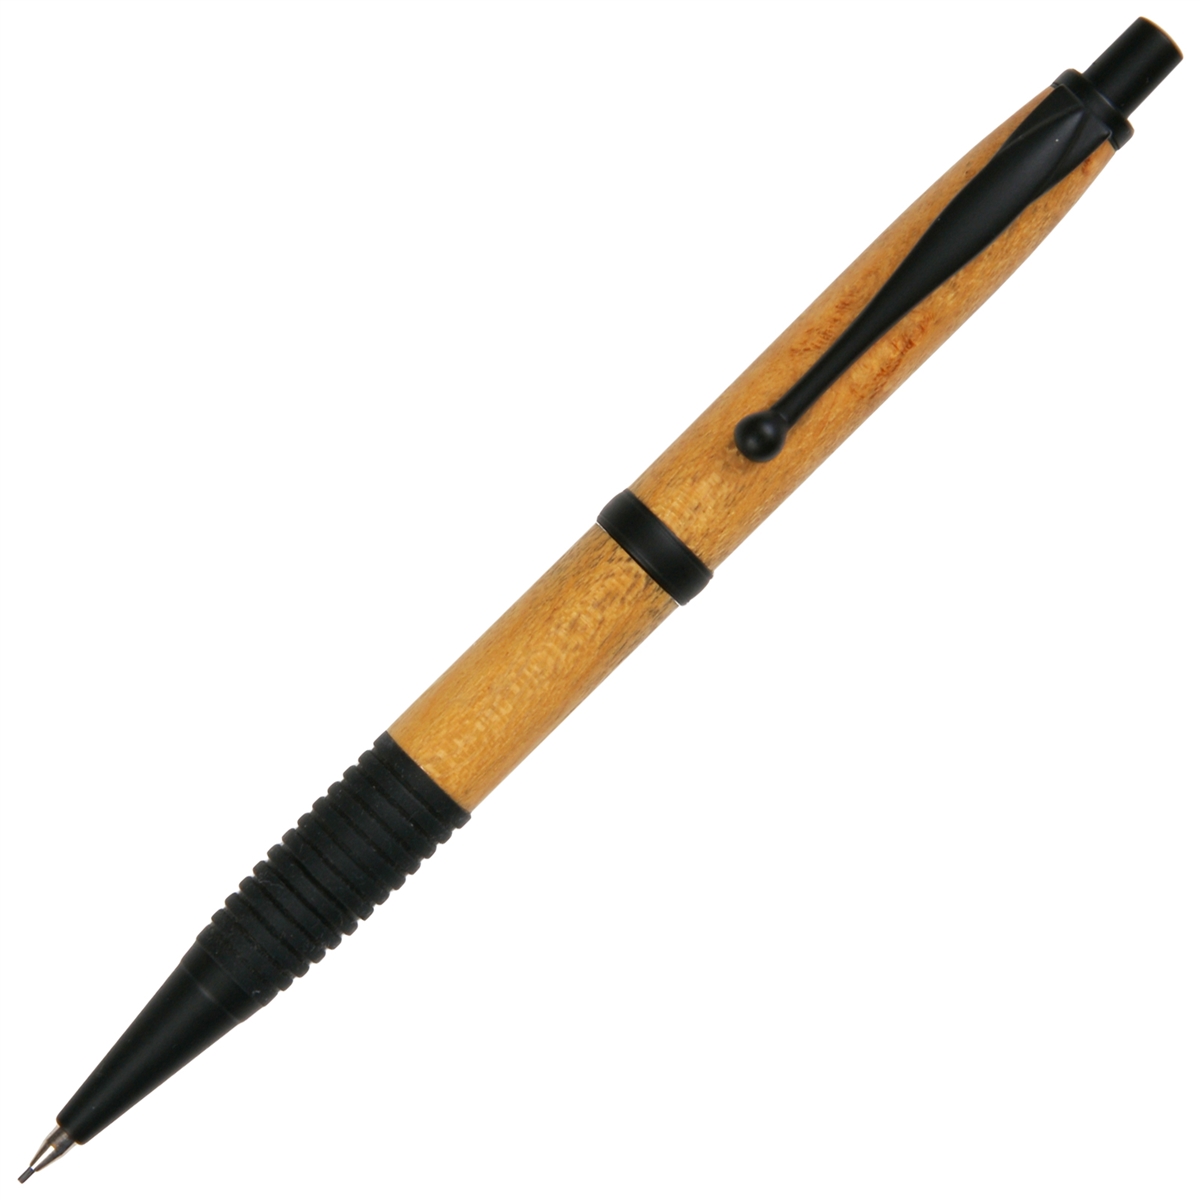 Yellowheart Comfort Pencil with Grip - Lanier Pens